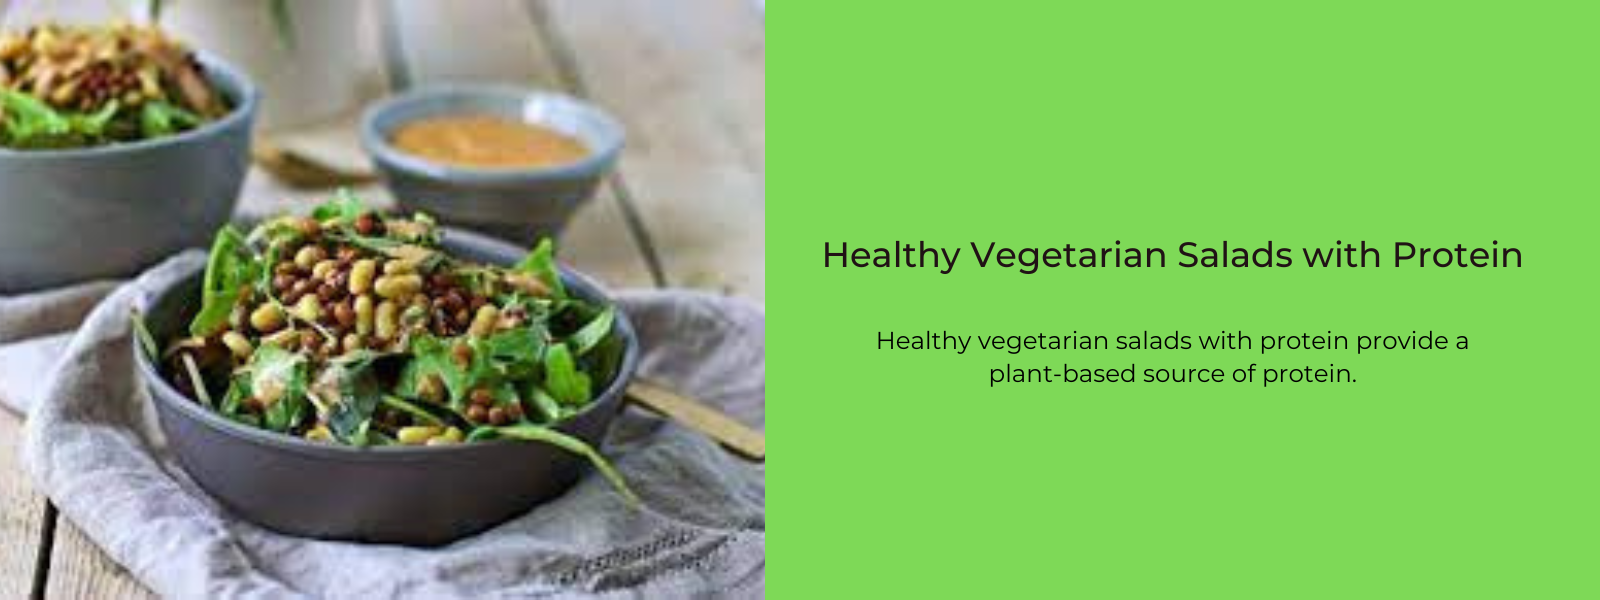 Healthy Vegetarian Salads with Protein